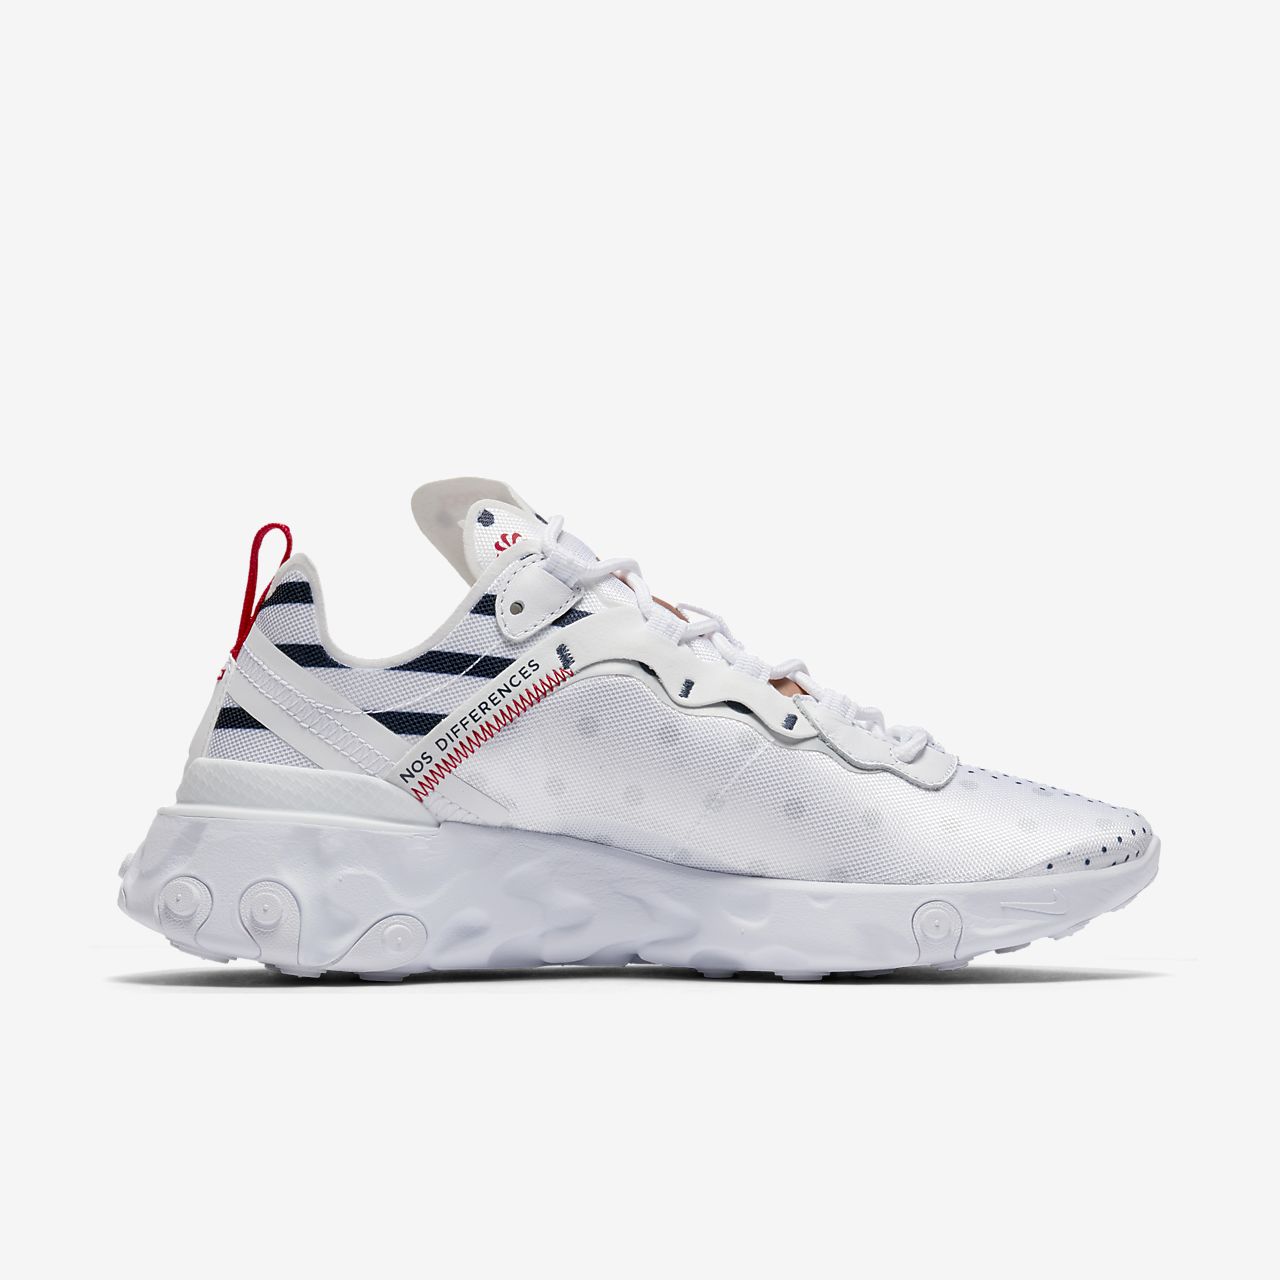 nike react element 55 personalizzate